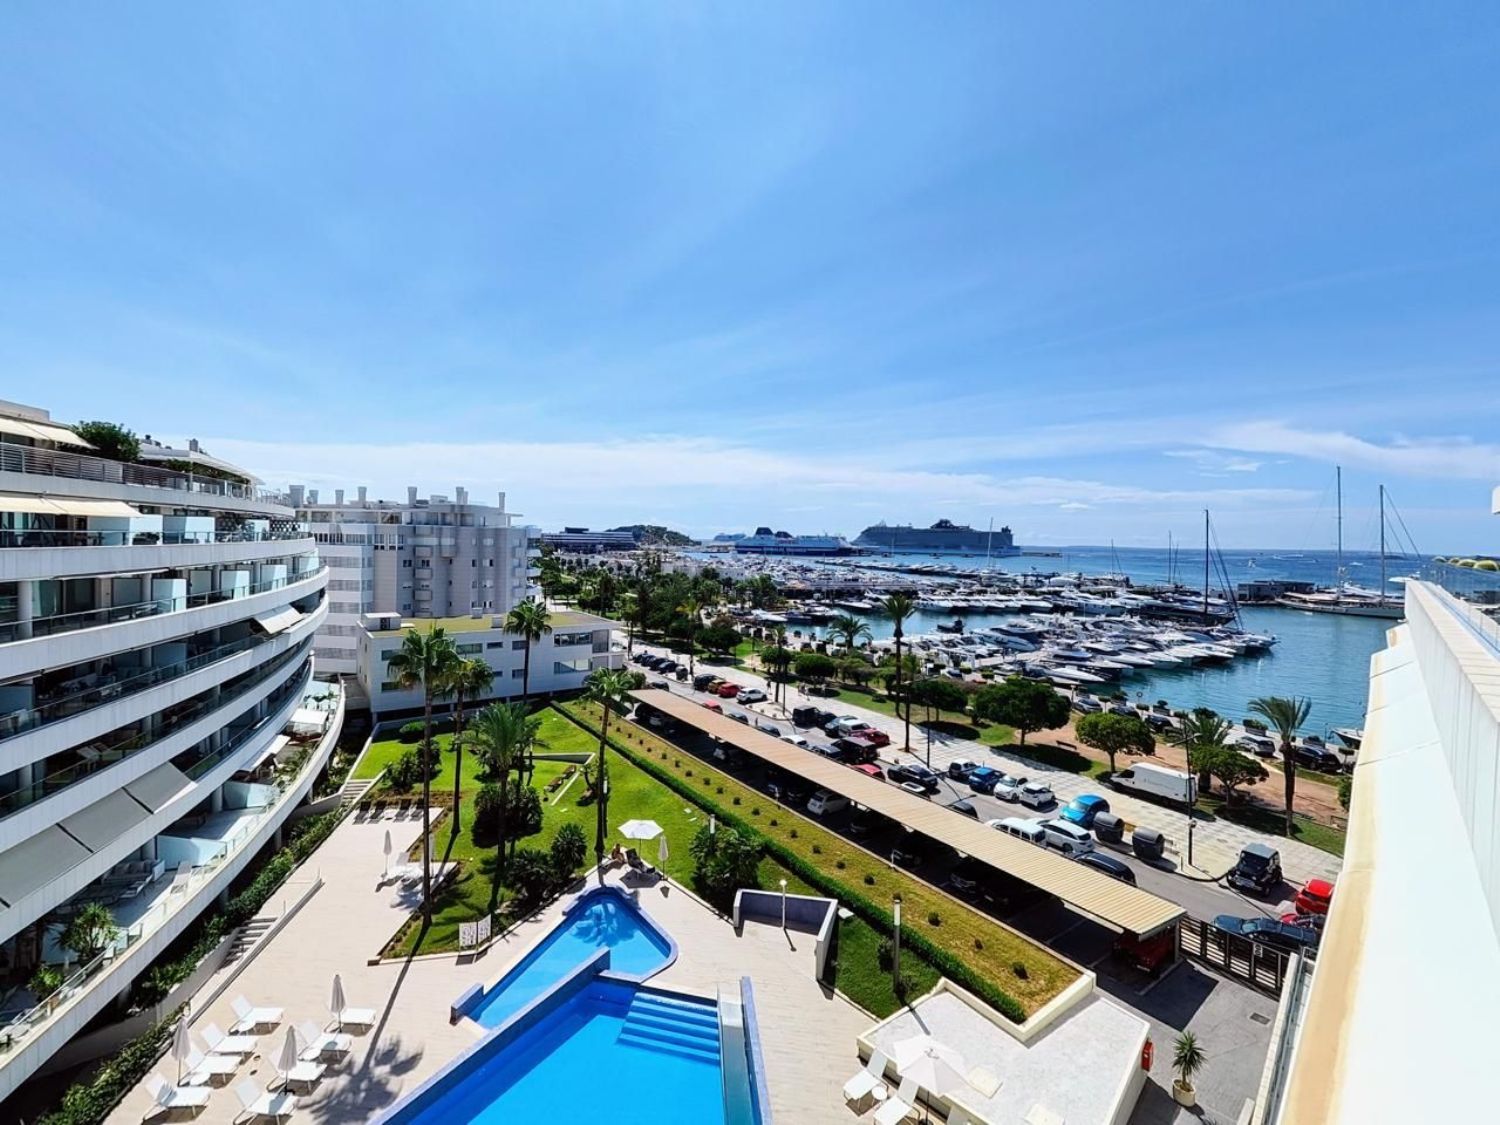 Flat for sale on the seafront in Marina Botafoc, in Ibiza